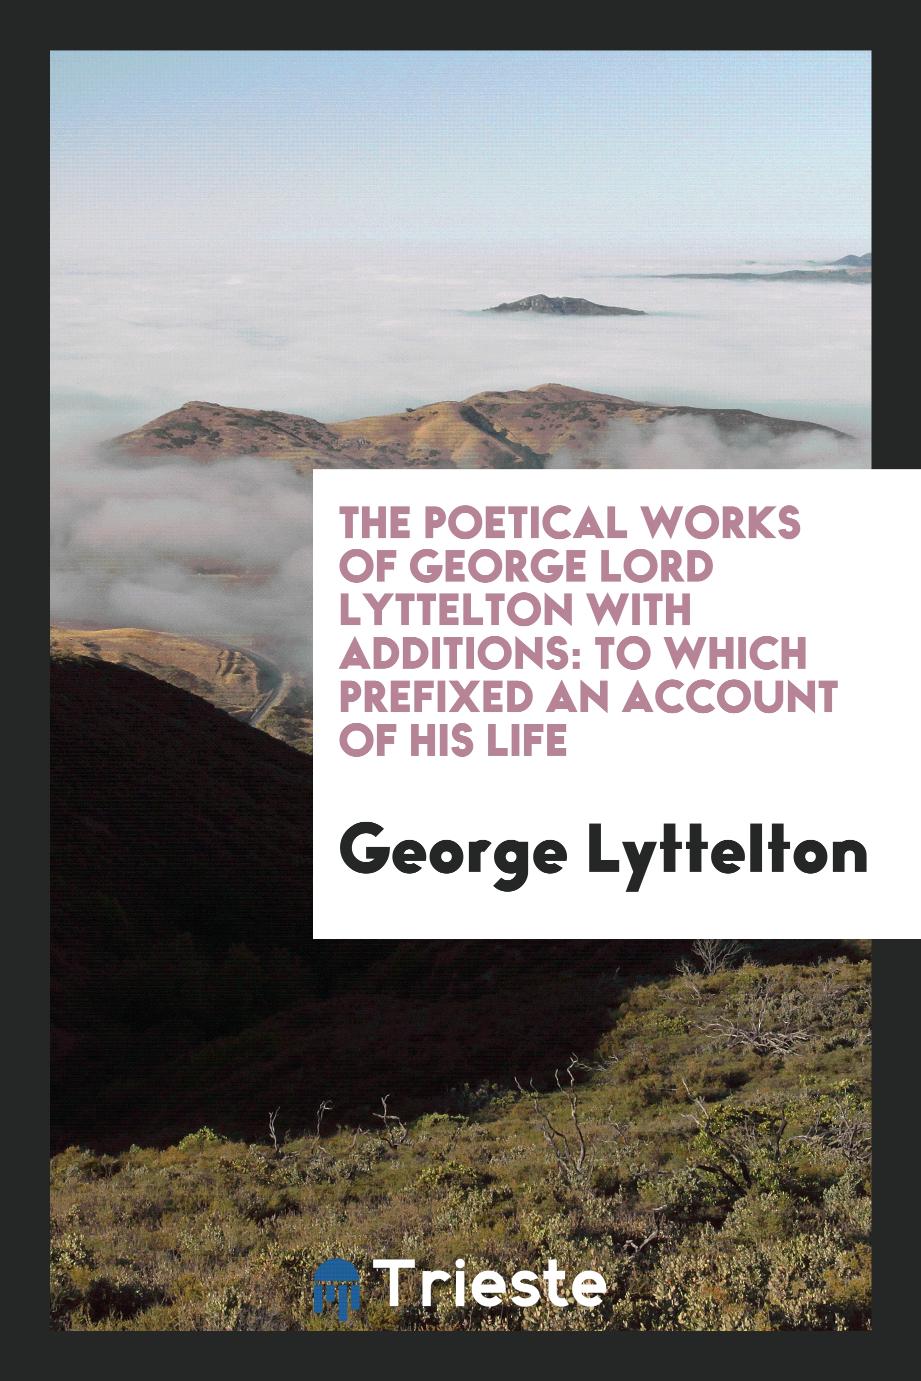 The Poetical Works of George Lord Lyttelton with Additions: To Which Prefixed an Account of His Life